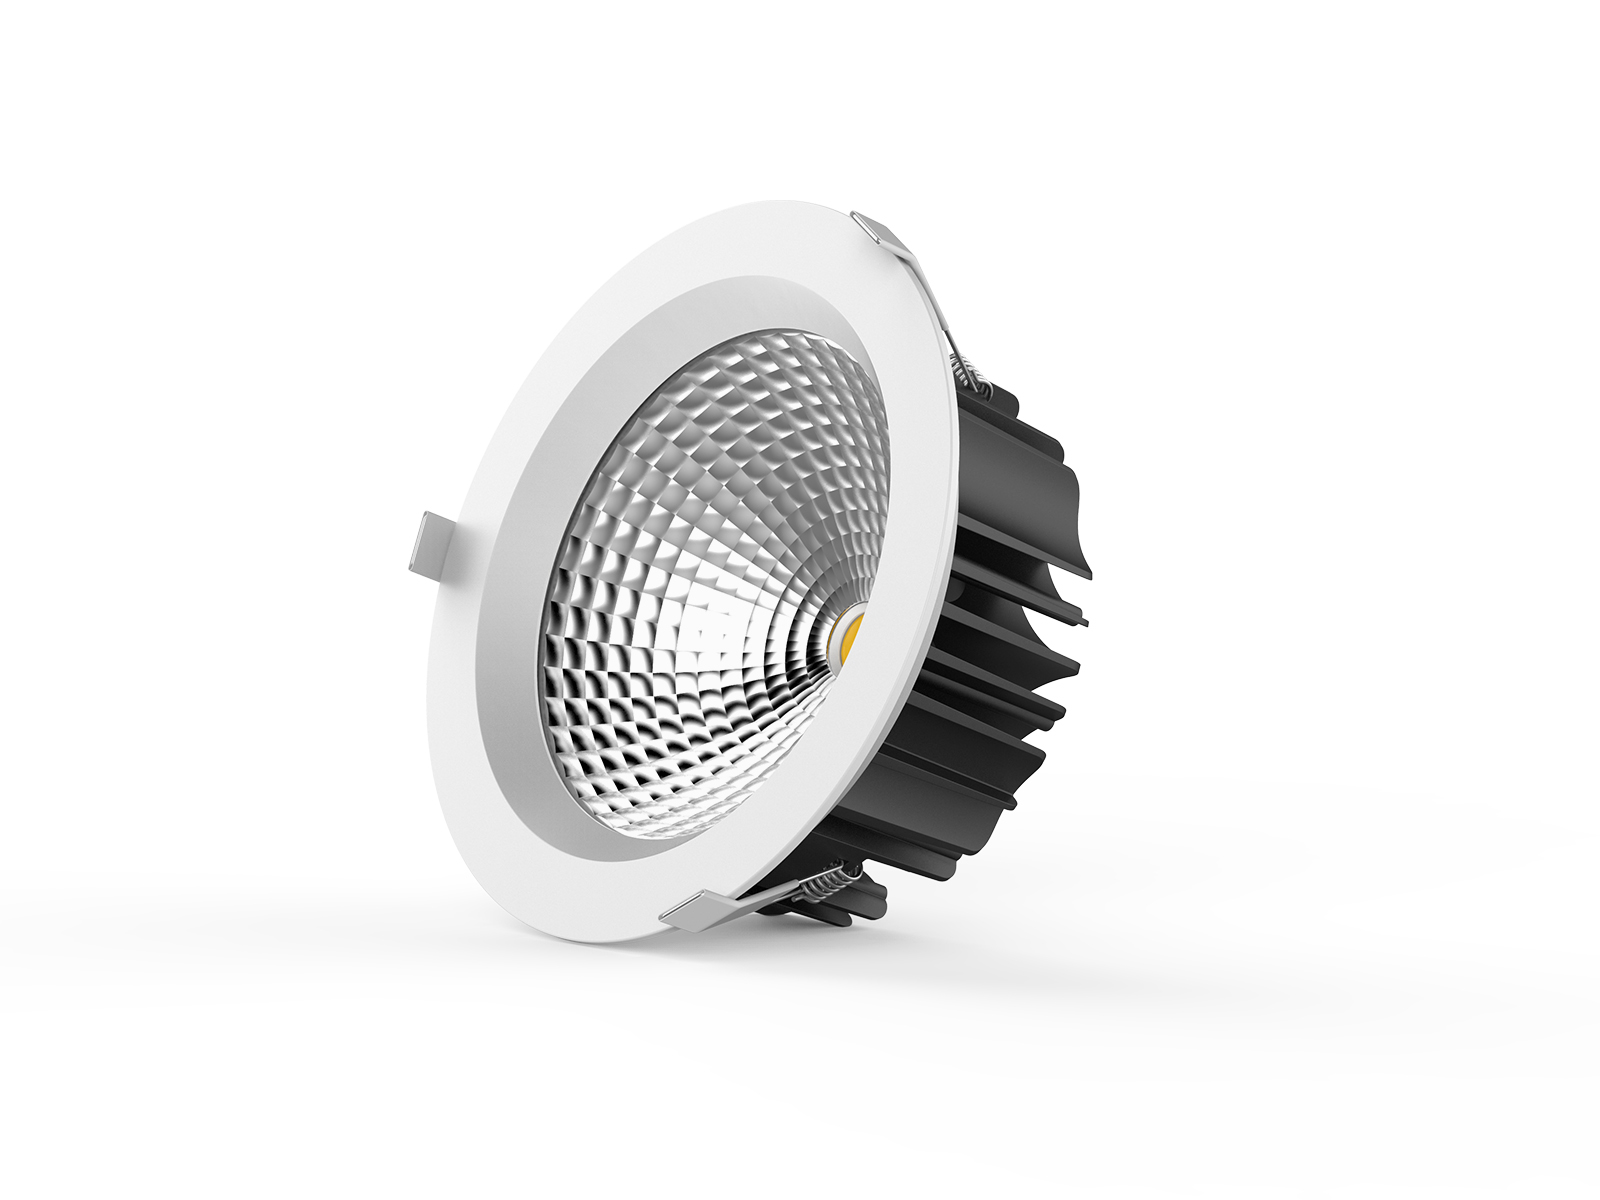 35W LED Downlight Fixtures